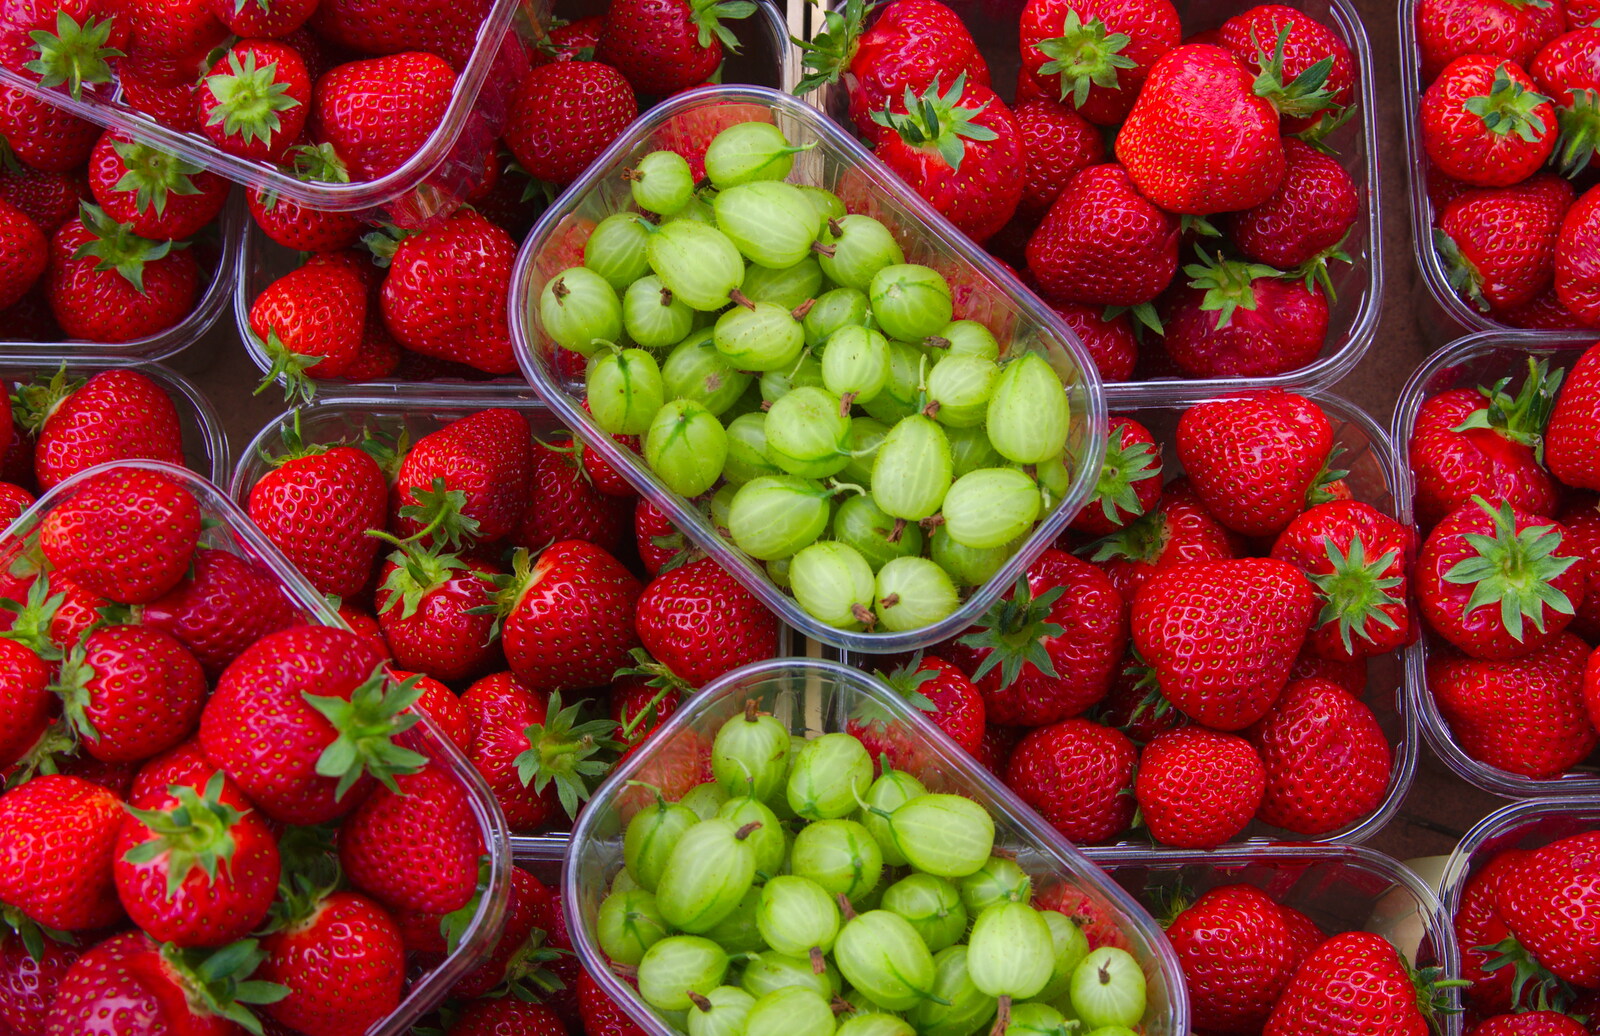 A nice contrast of strawberries and gooseberries from Sis and Matt Visit, Suffolk and Norfolk - 31st May 2014